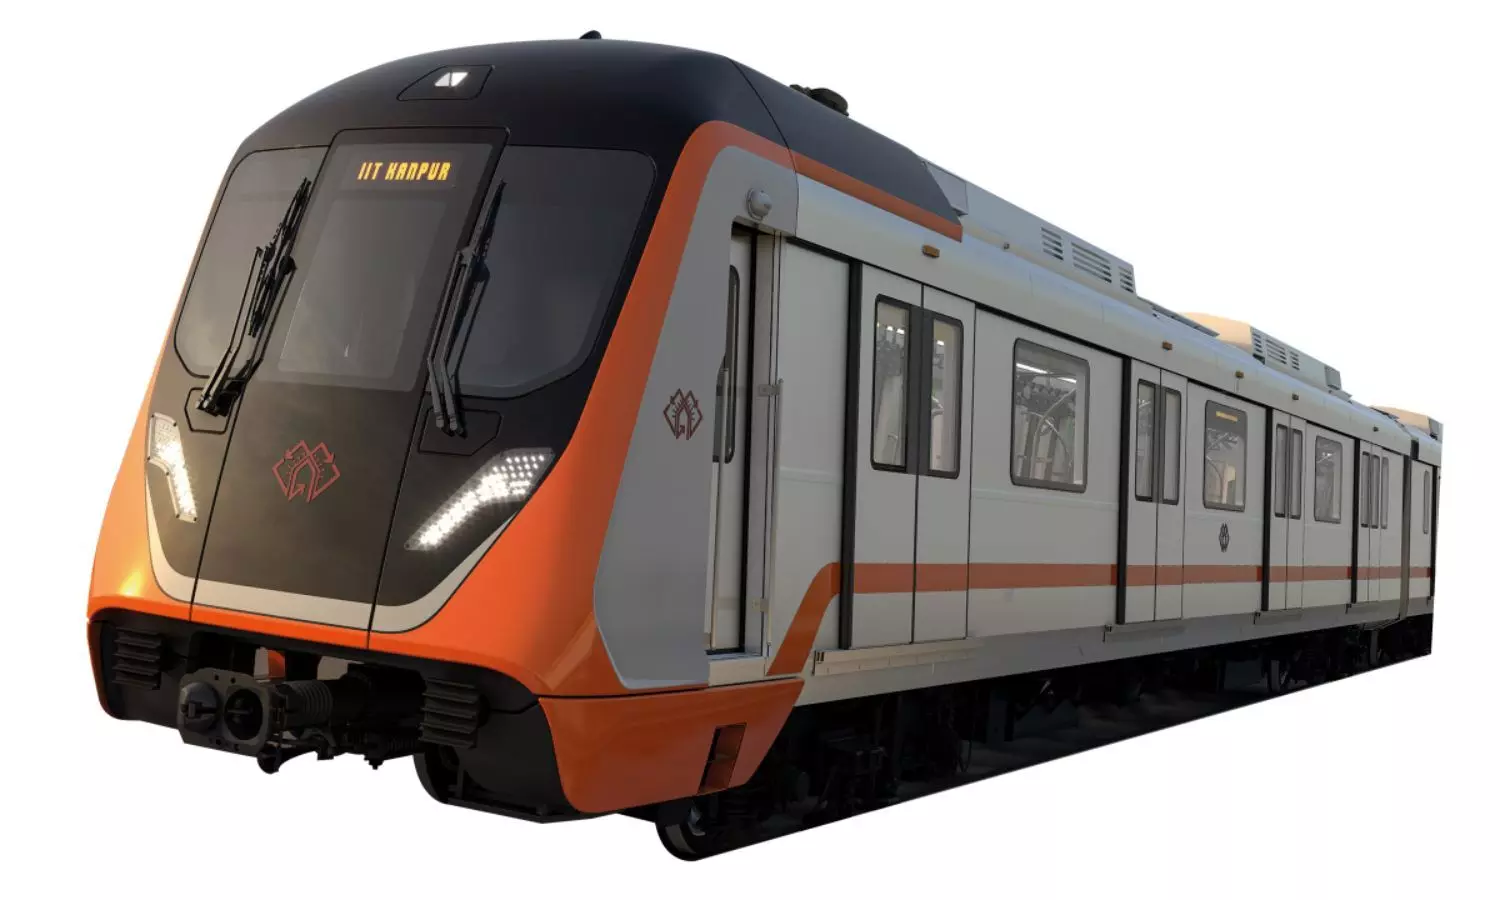 Lucknow Metro returned 8 Lakh cash laptops and mobiles of passengers in the year 2022